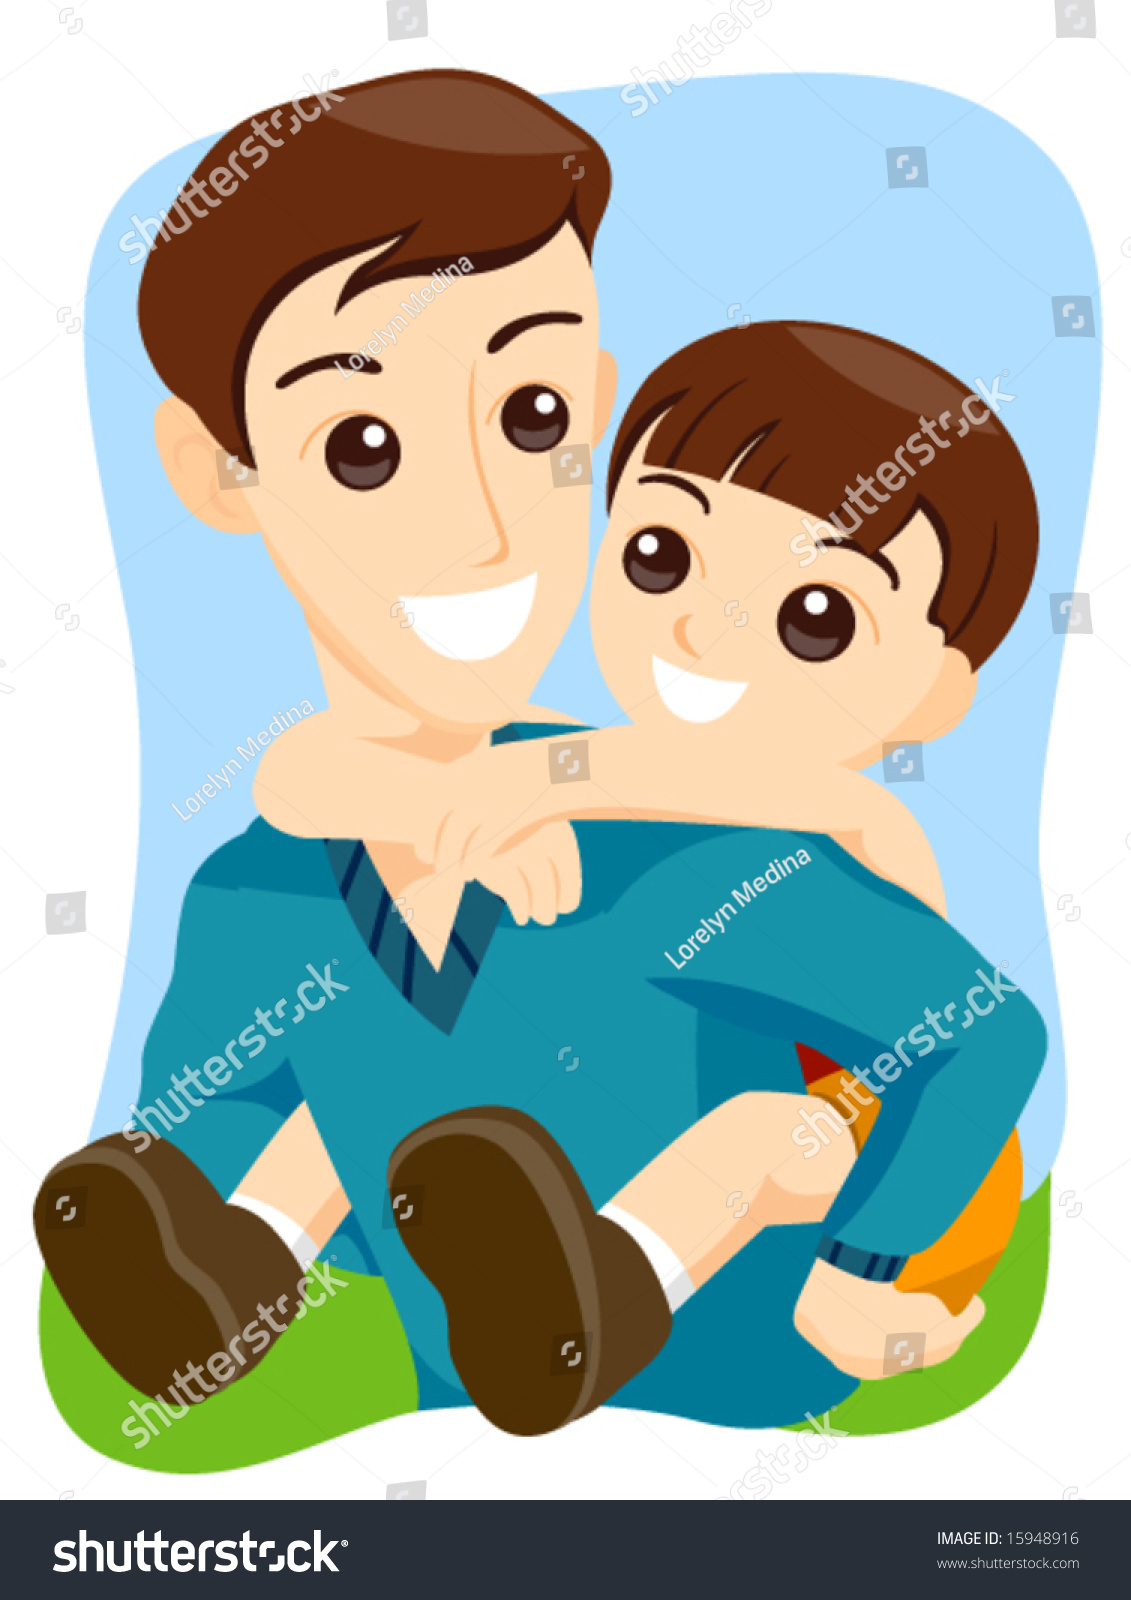 Father And Son - Vector - 15948916 : Shutterstock